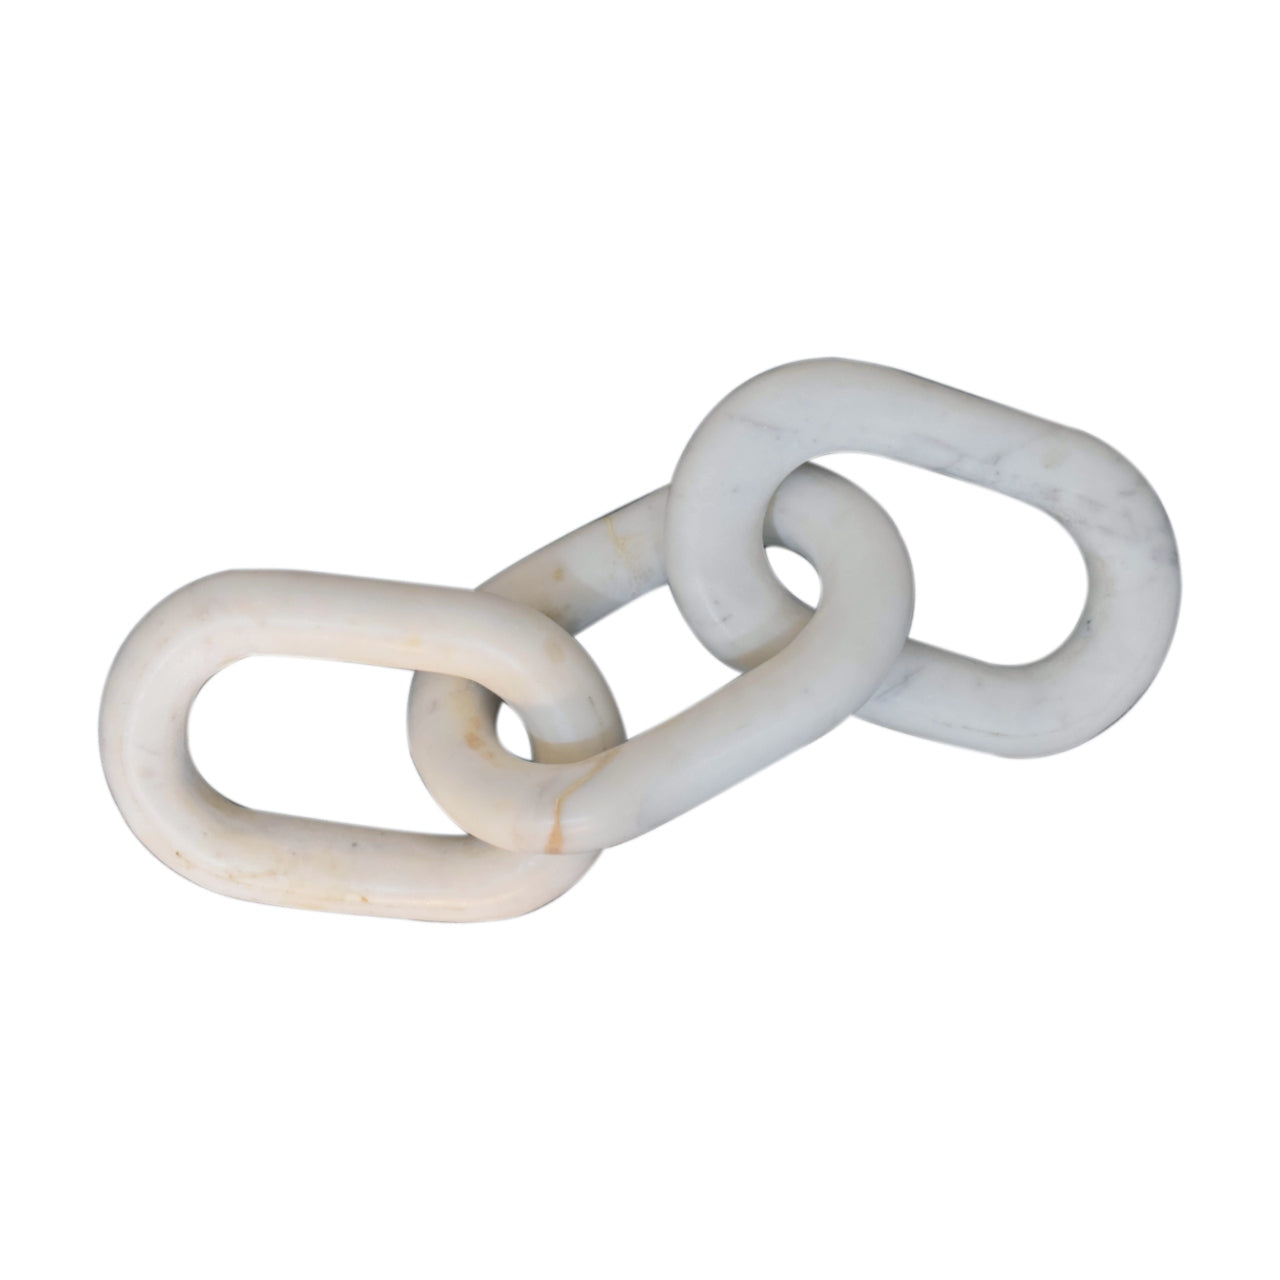 View Decorative Marble Chain information